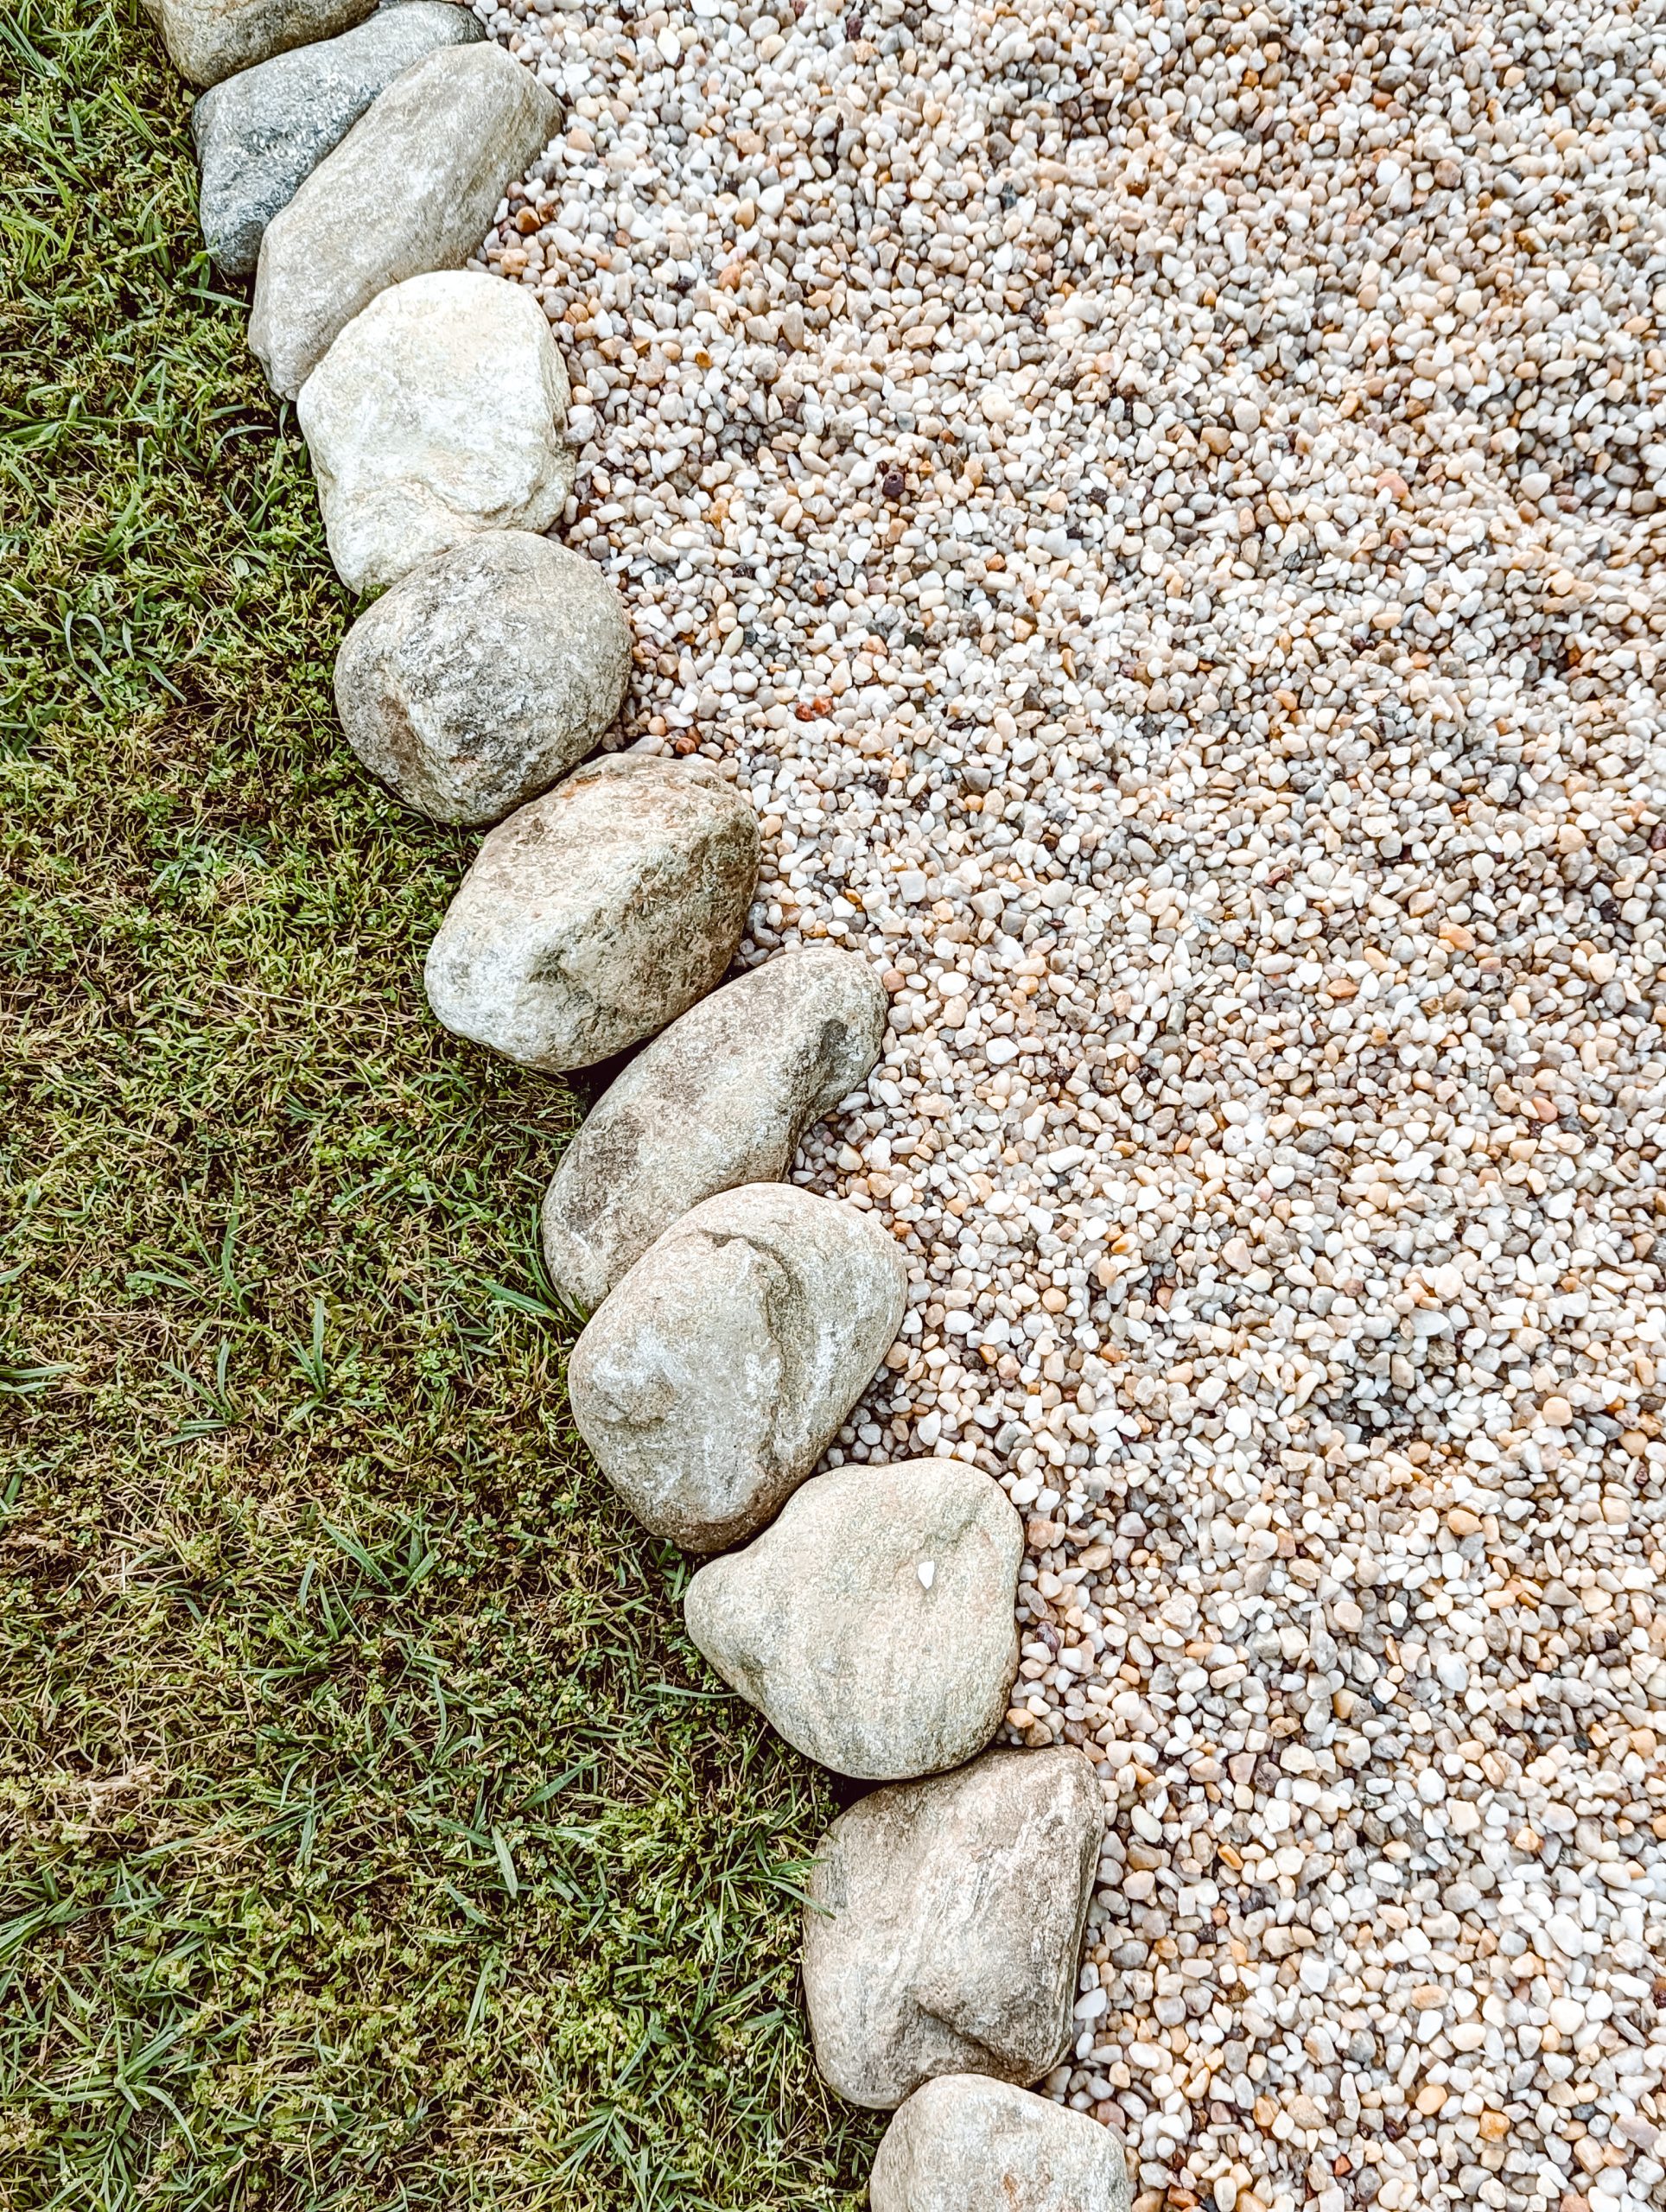 cane creek stones used as natural stone edging along the sides of a white pea gravel walkway